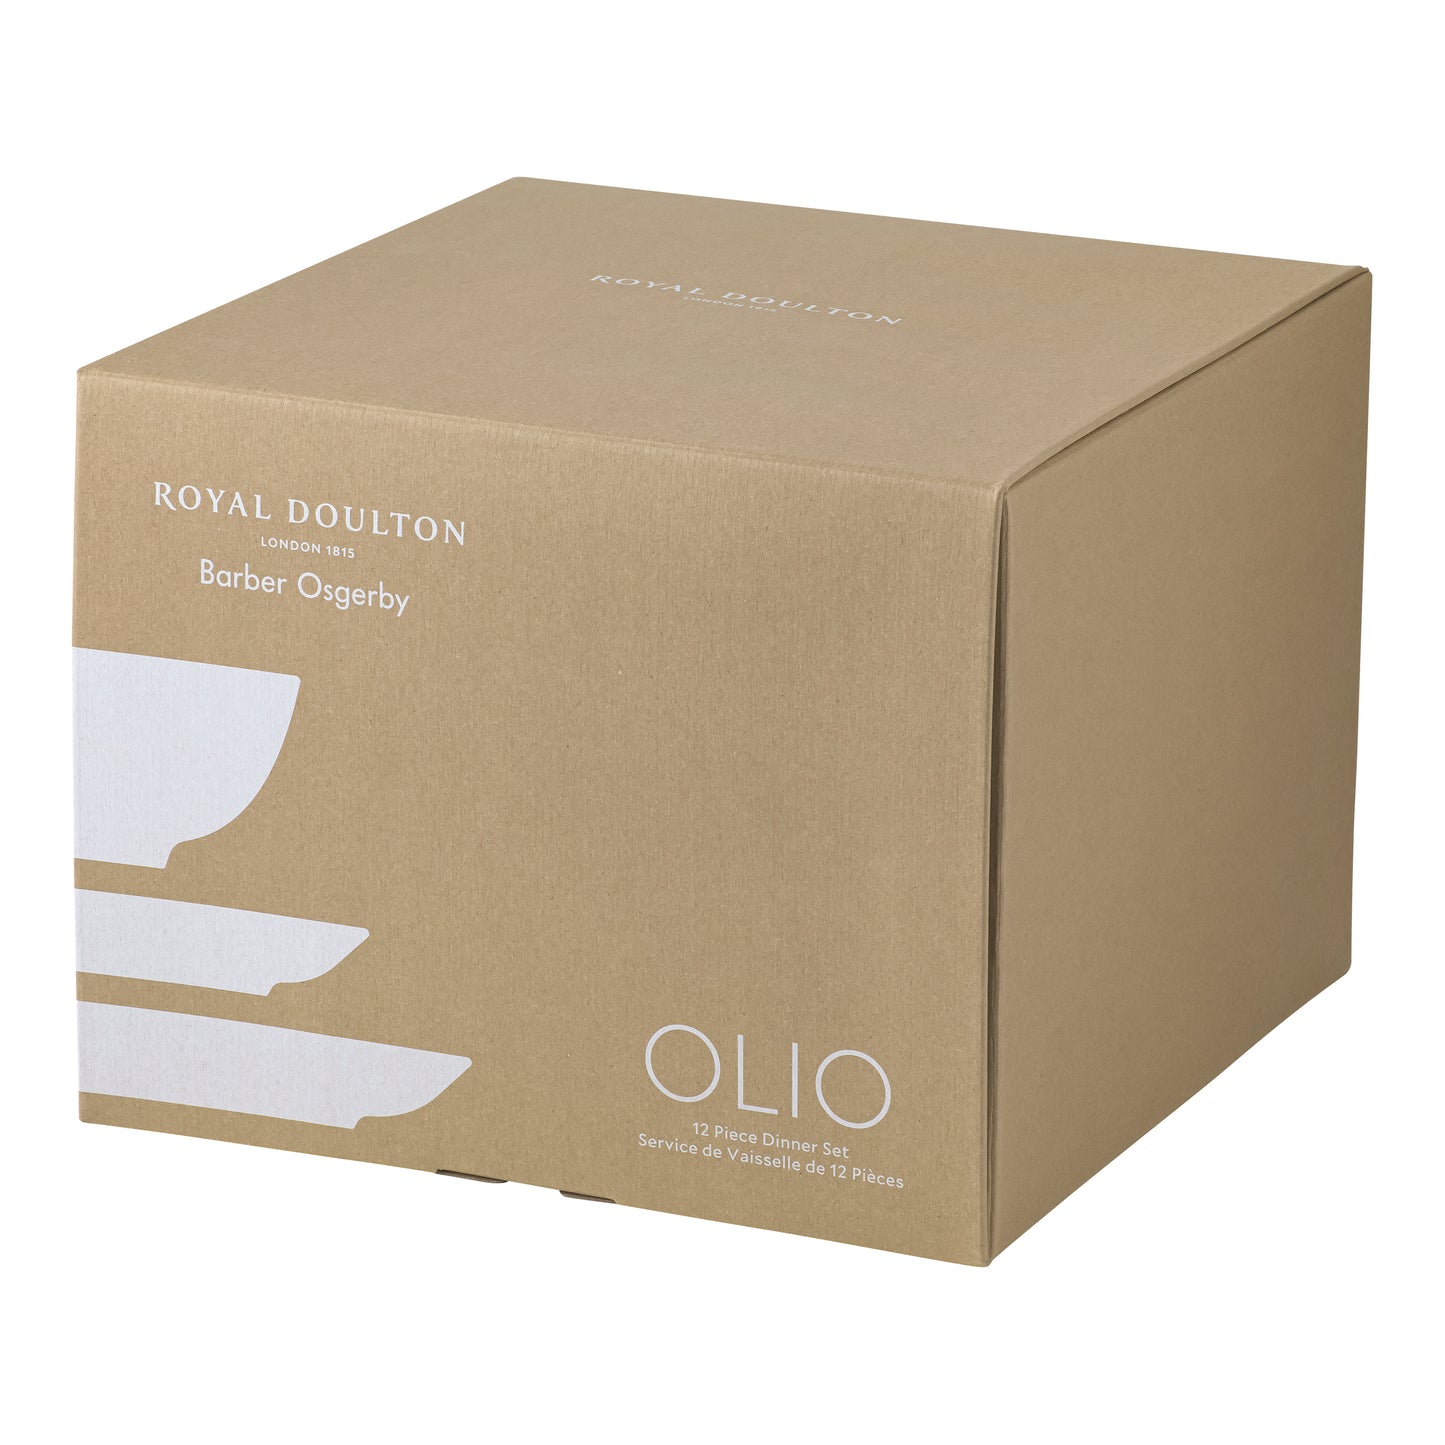 Royal Doulton Olio by Barber Osgerby White 12-Piece Set